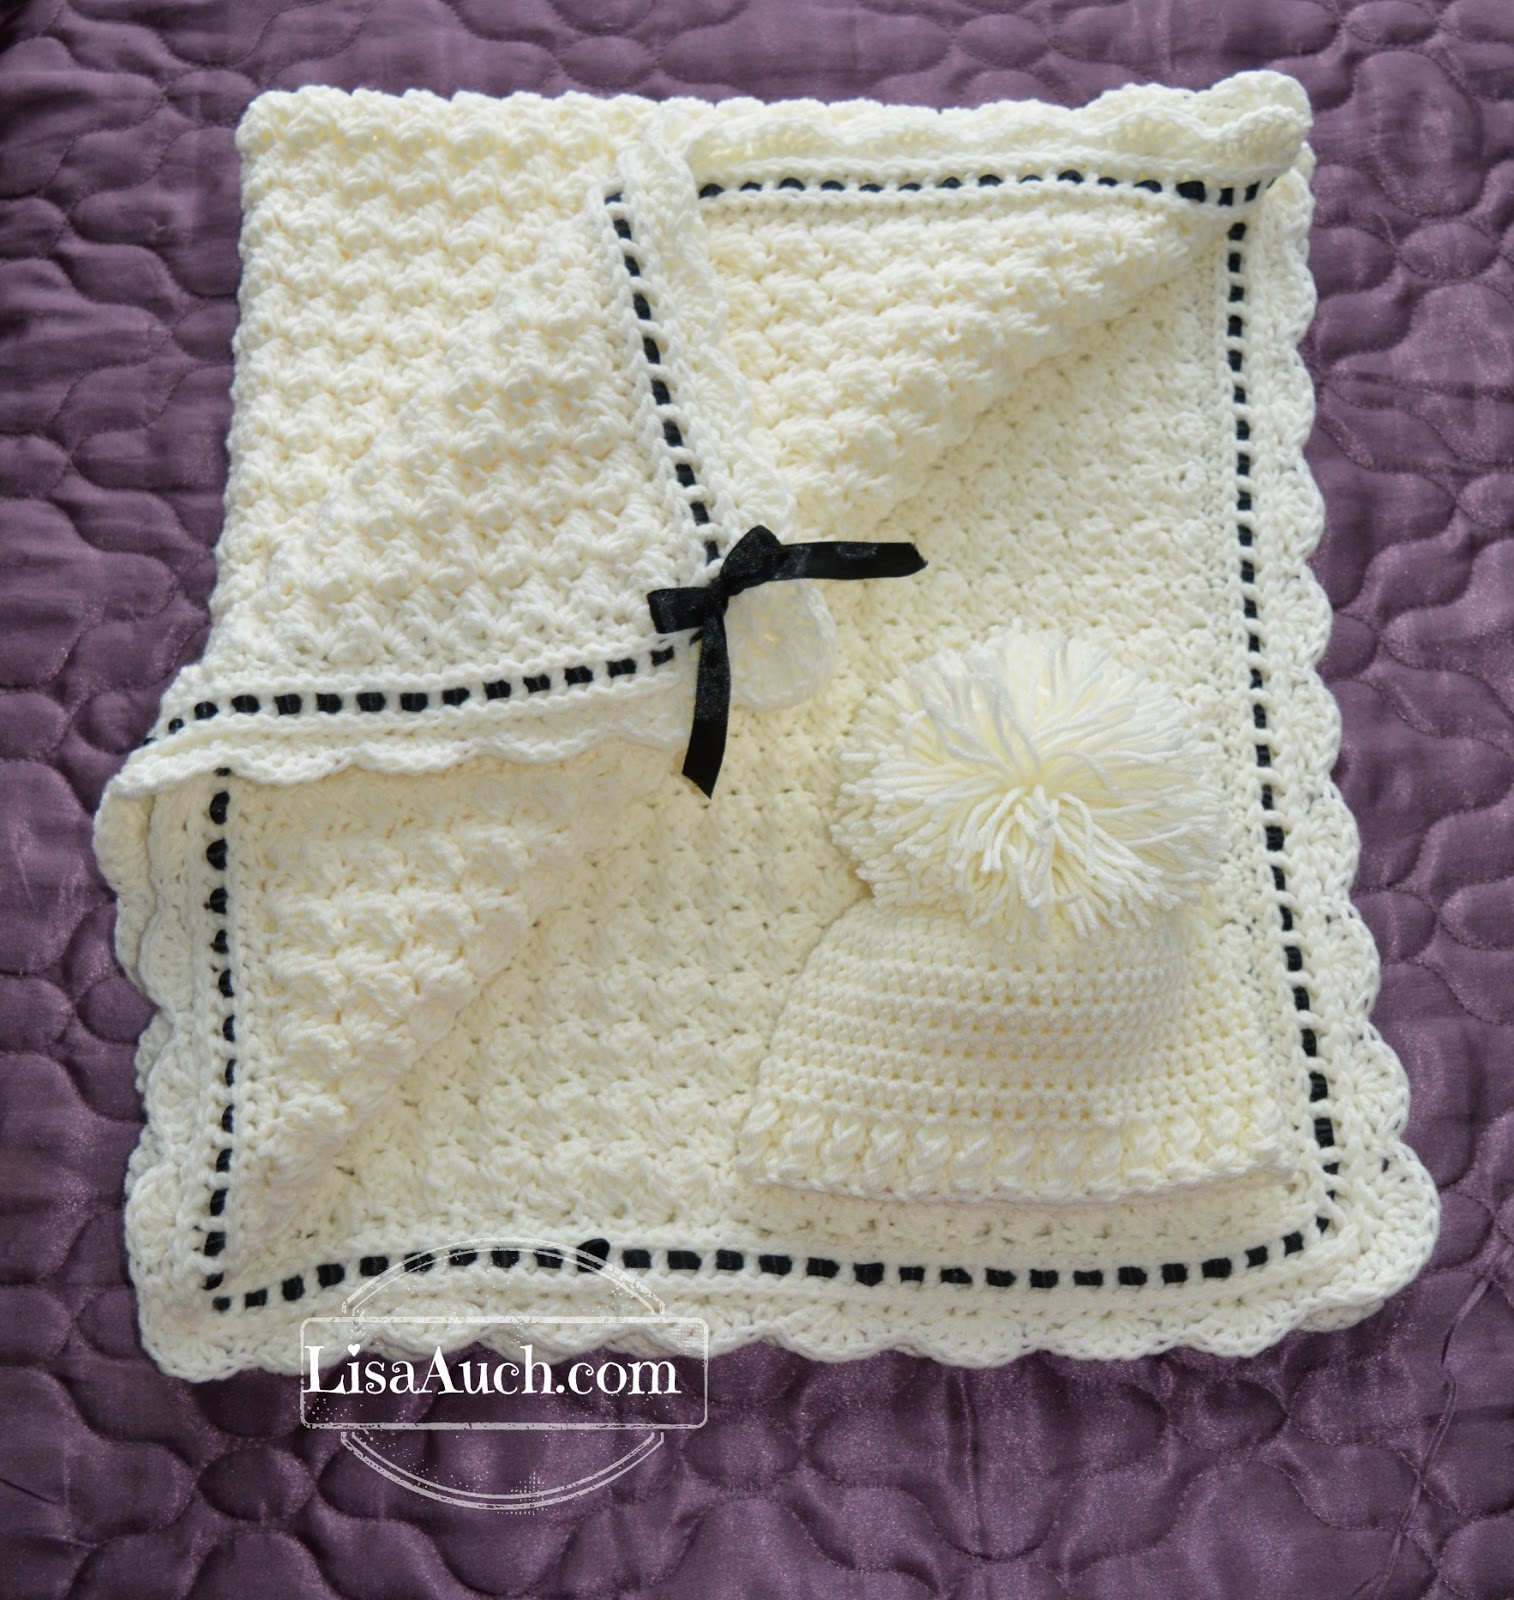 Crochet Baby Shawls Free Patterns Free Crochet Patterns And Designs Lisaauch Crochet Ba Blanket